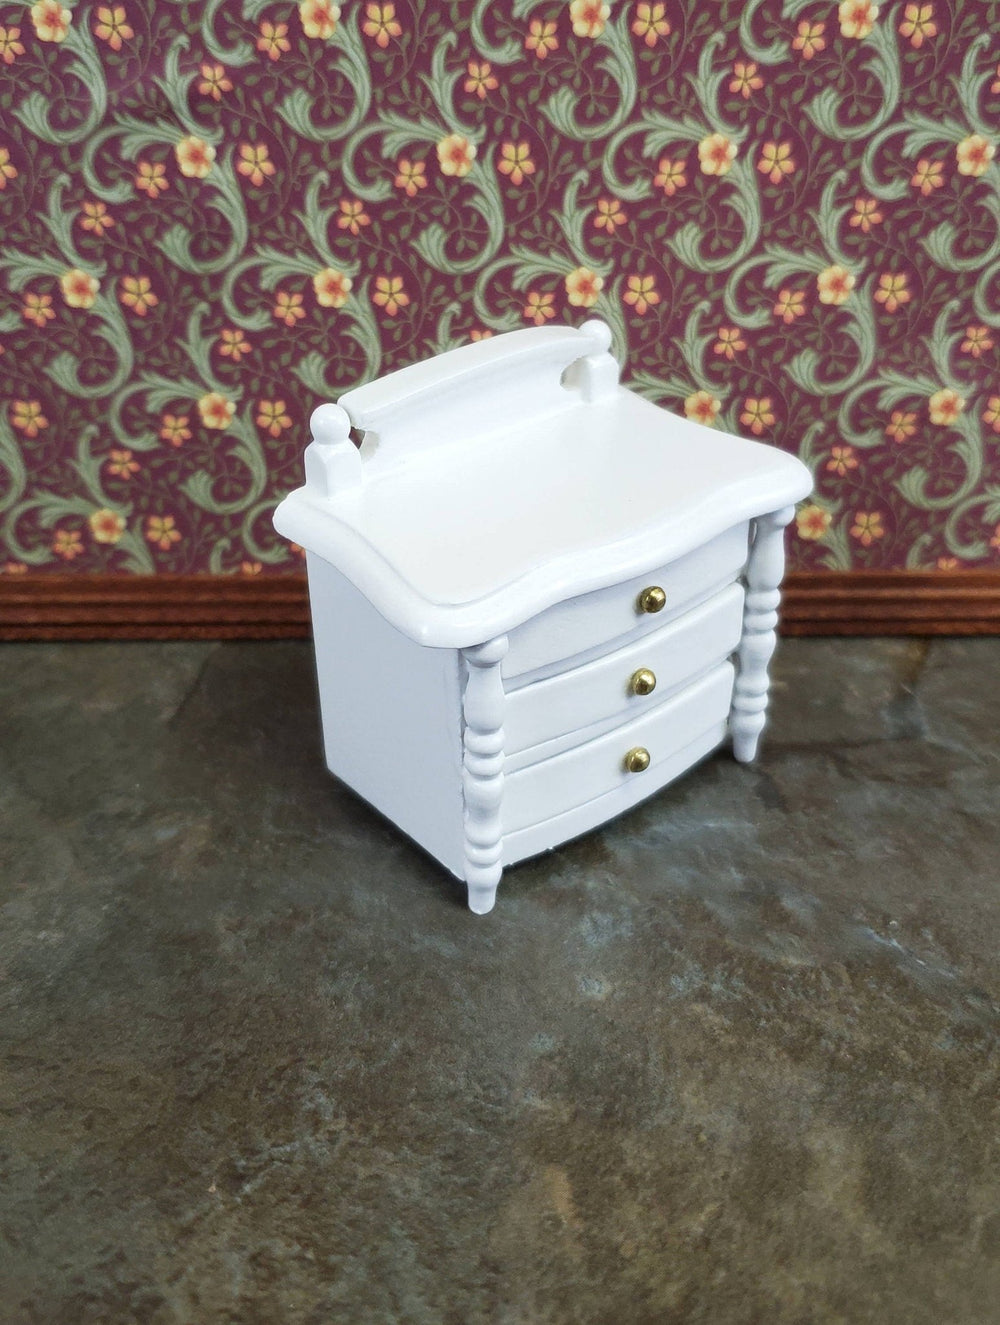 Dollhouse Miniature Night Stand Side Table 3 Drawers 1:12 Scale White Wood - Miniature Crush